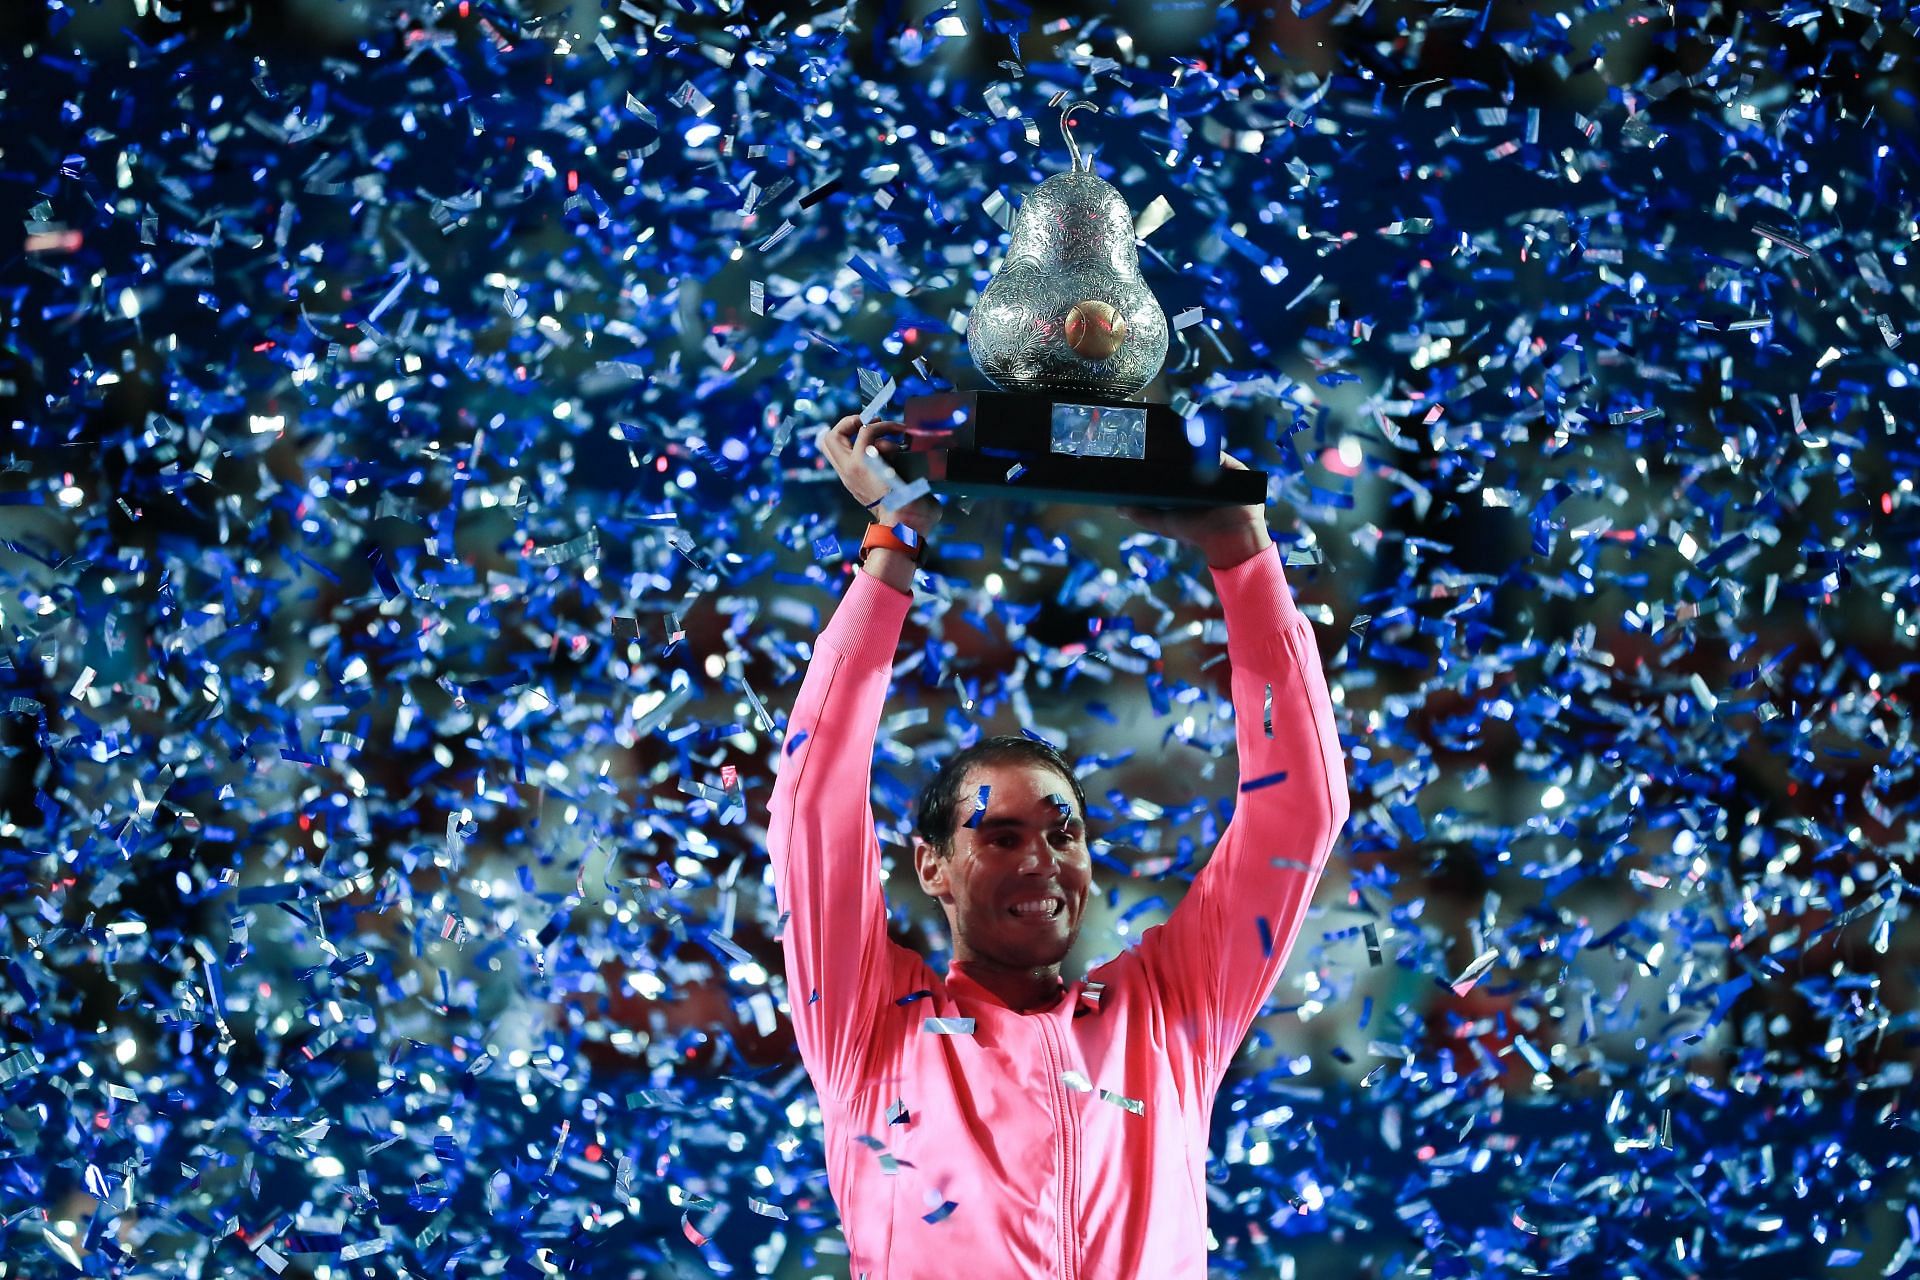 Rafael Nadal is a three-time champion in Mexico.